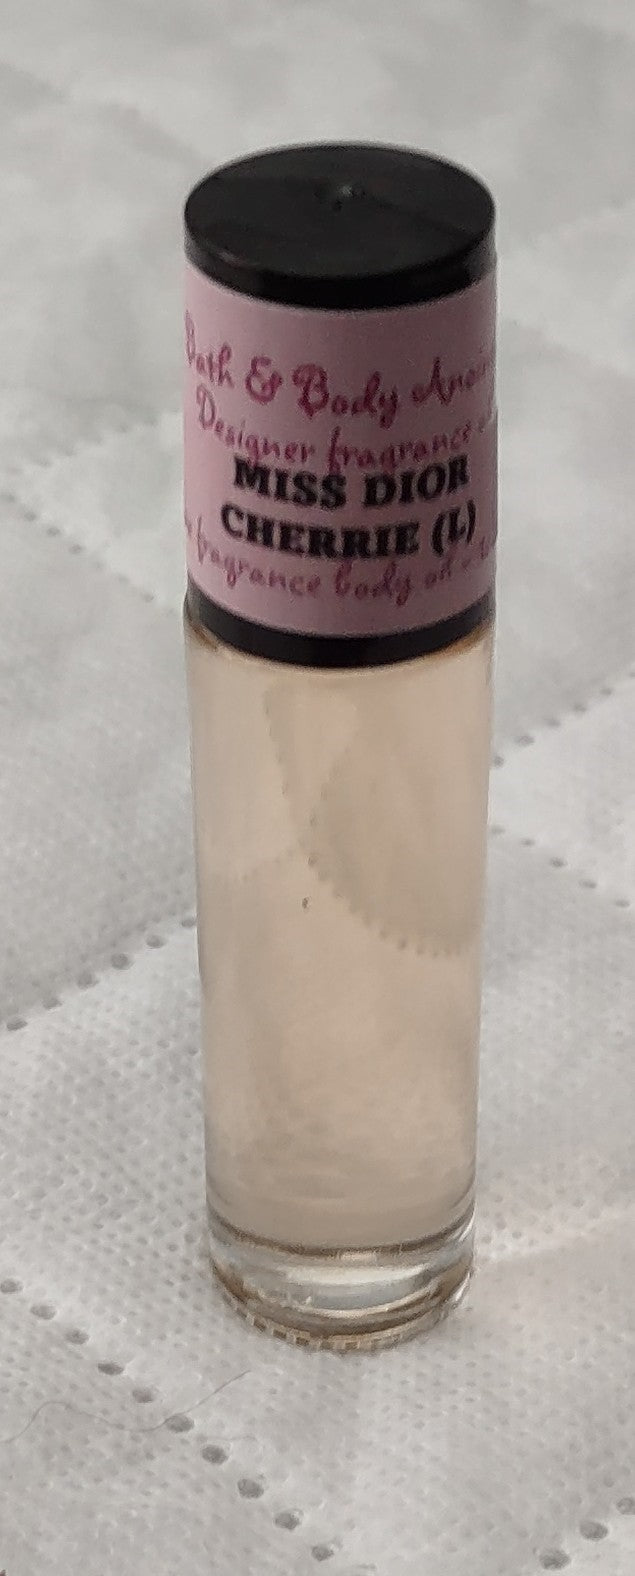 Miss Dior Cherrie for women - our impression.